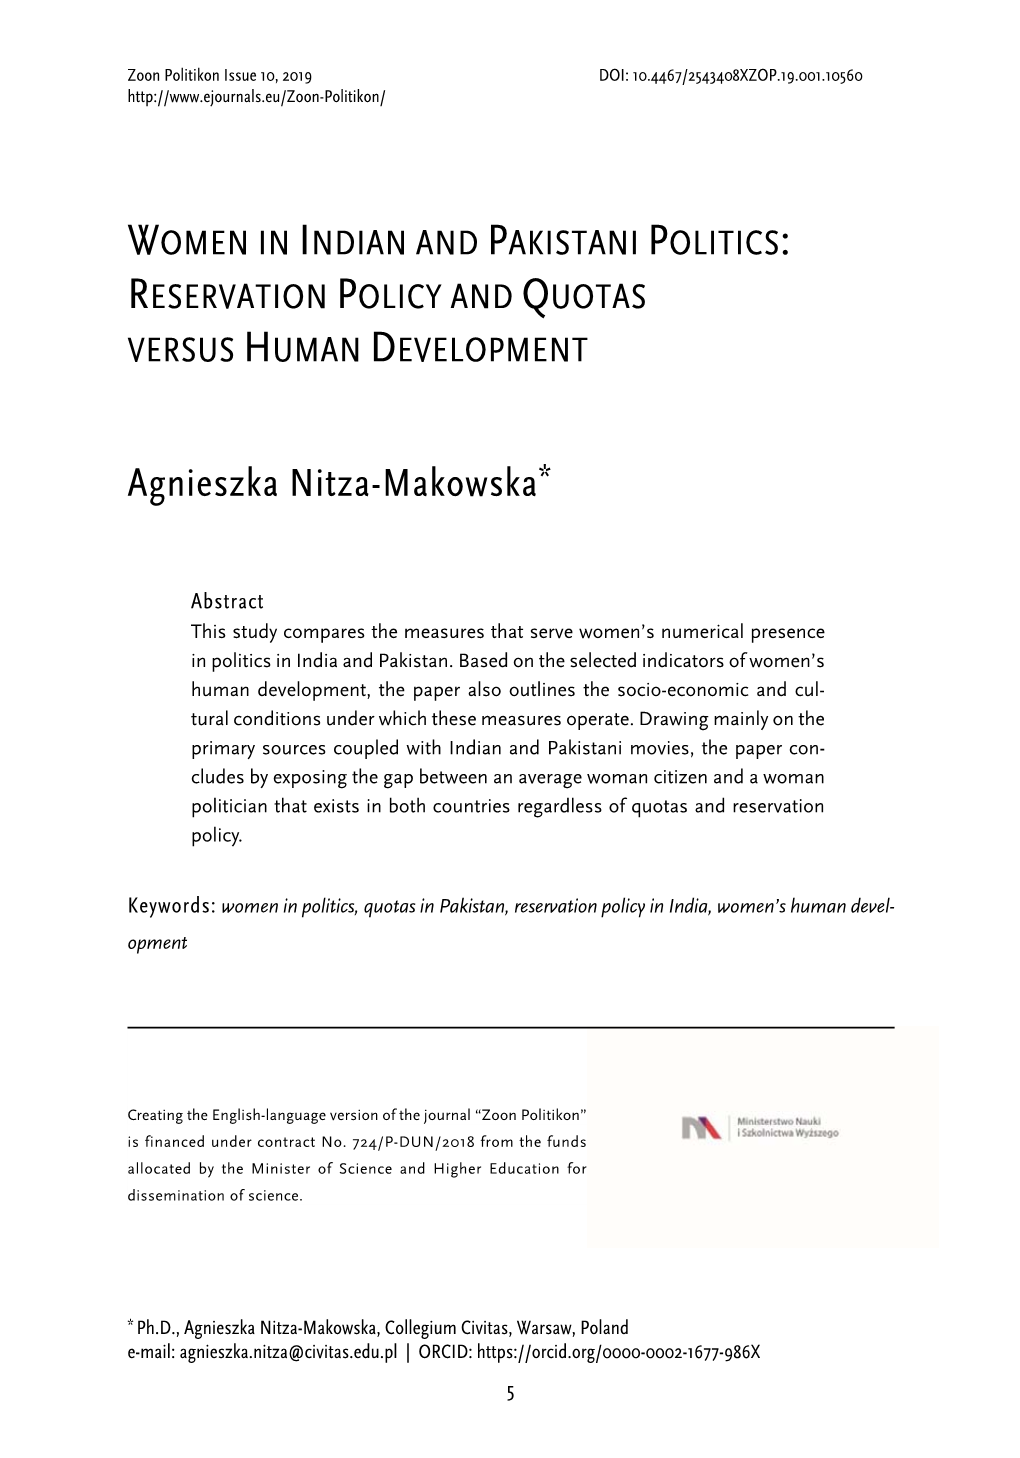 Women in Indian and Pakistani Politics: Reservation Policy and Quotas Versus Human Development